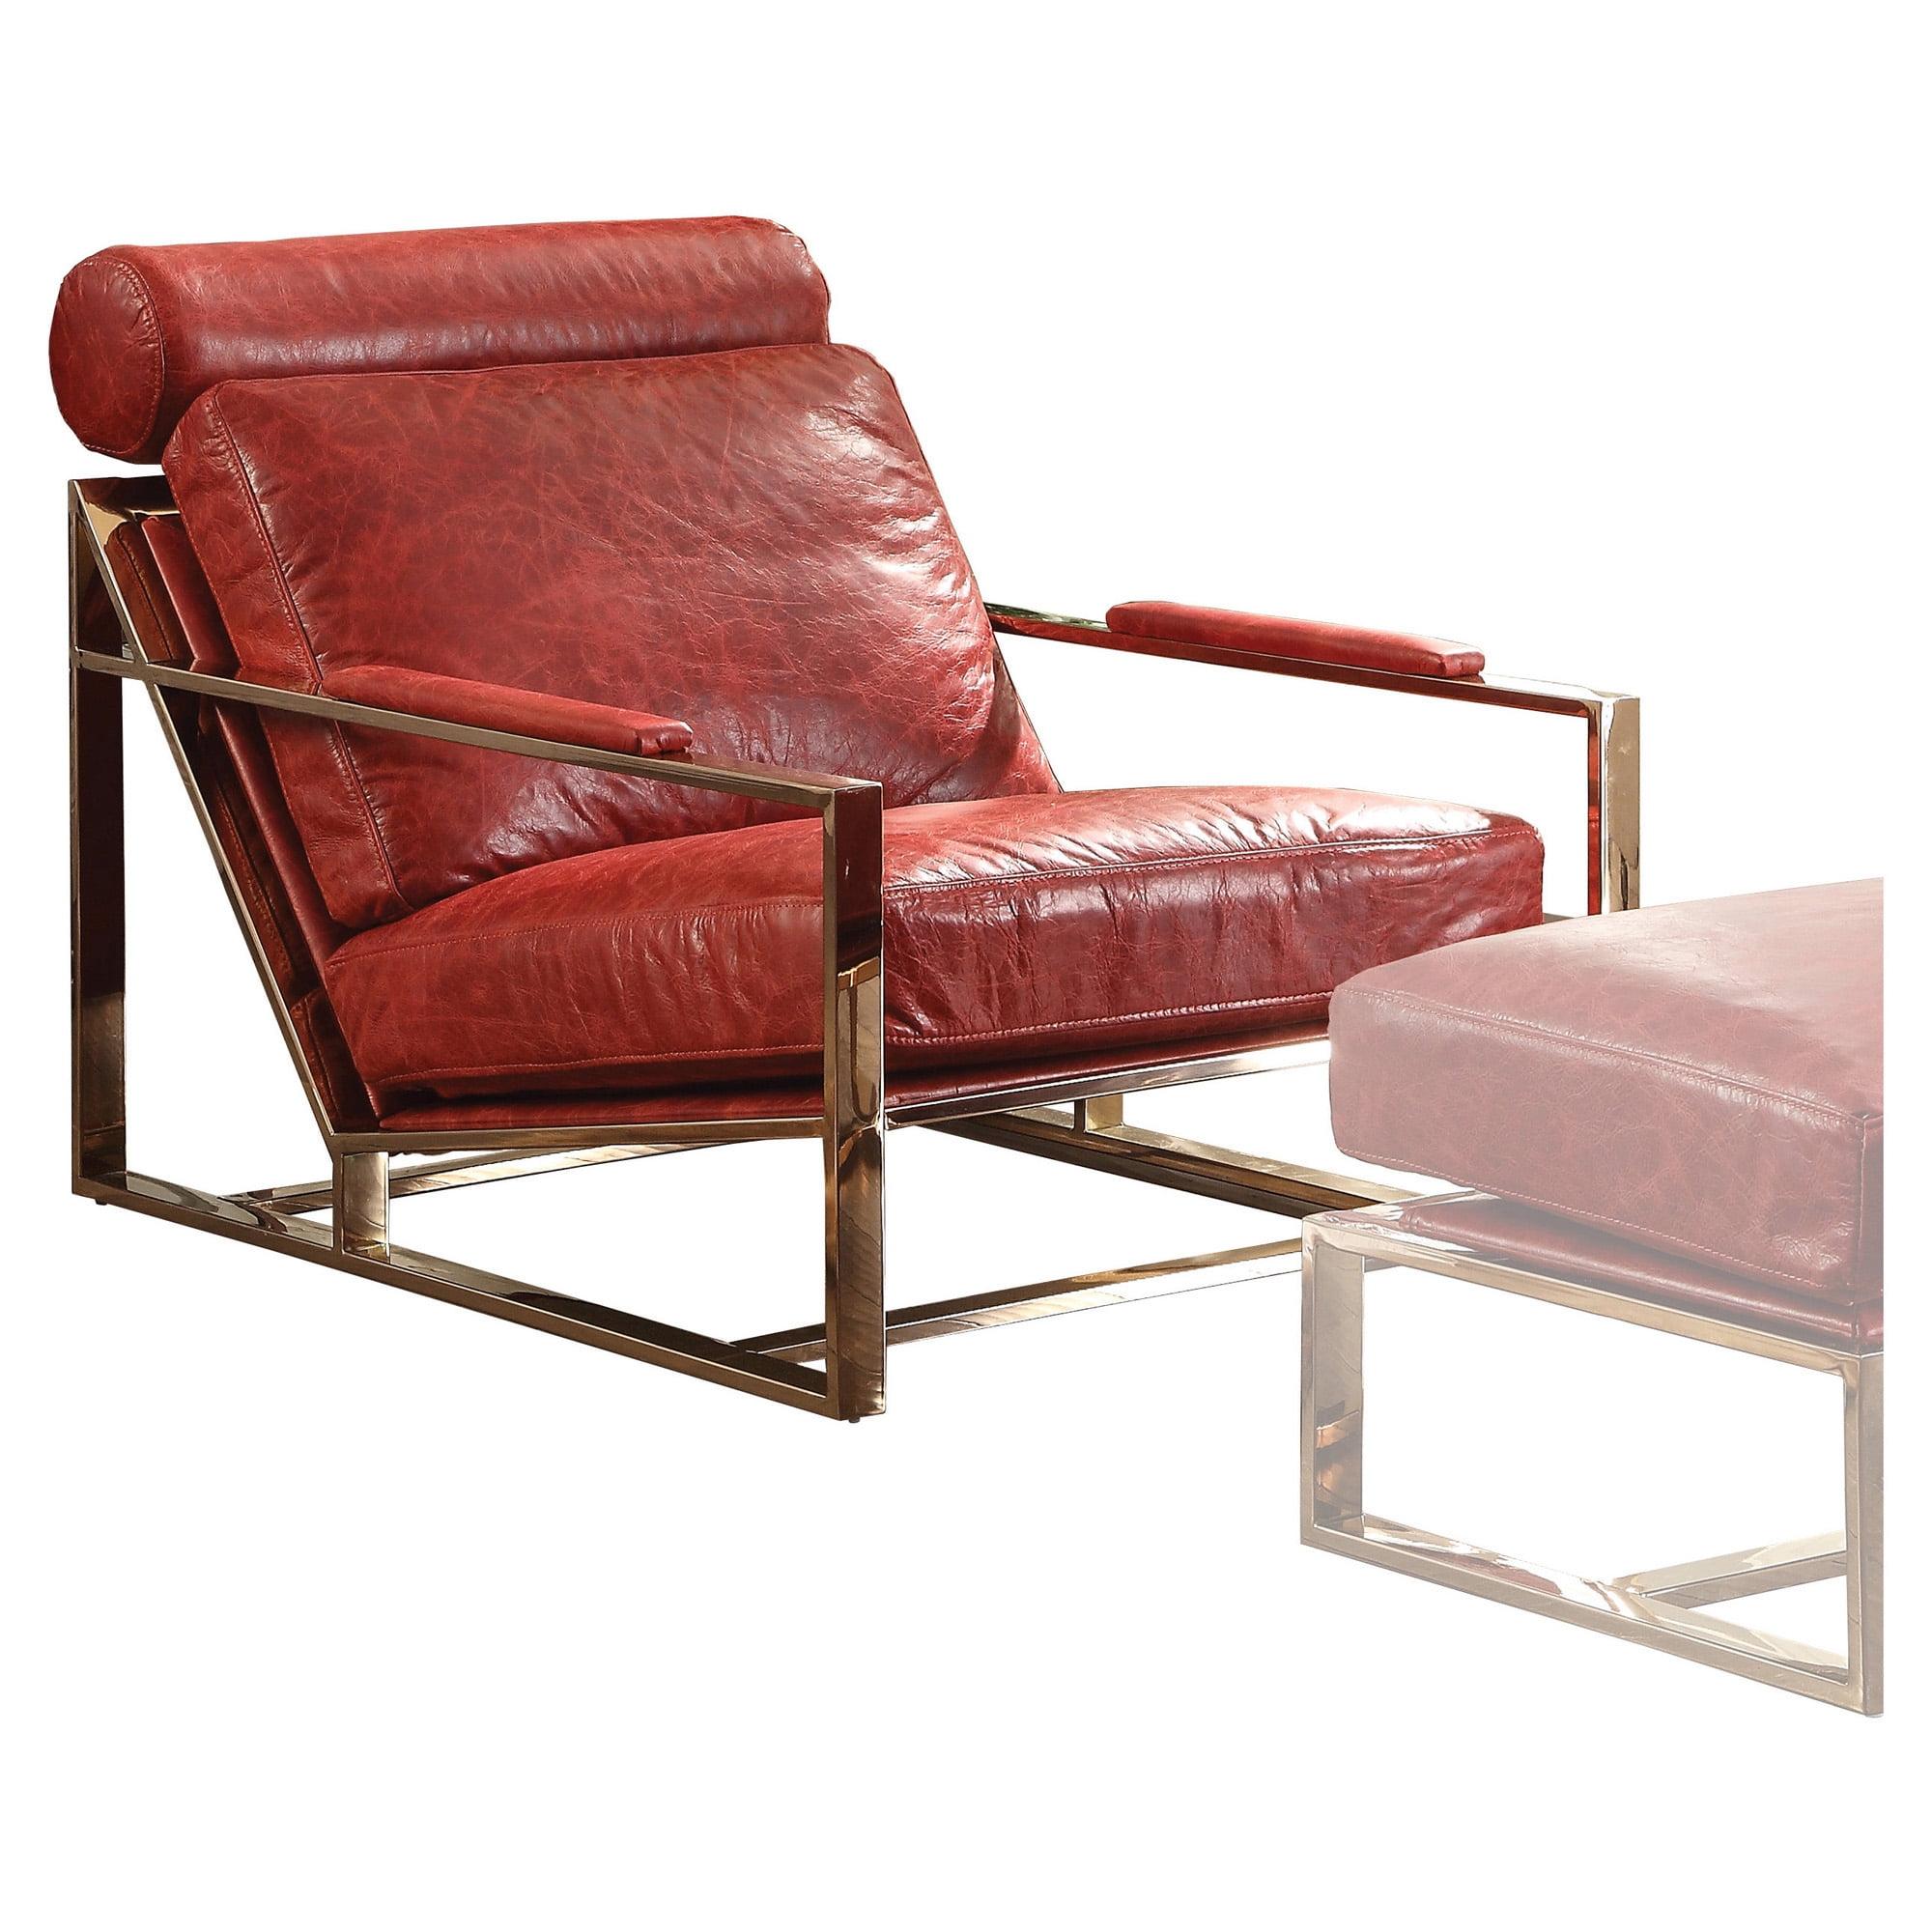 Antique Red Leather Chaise with Metal Frame